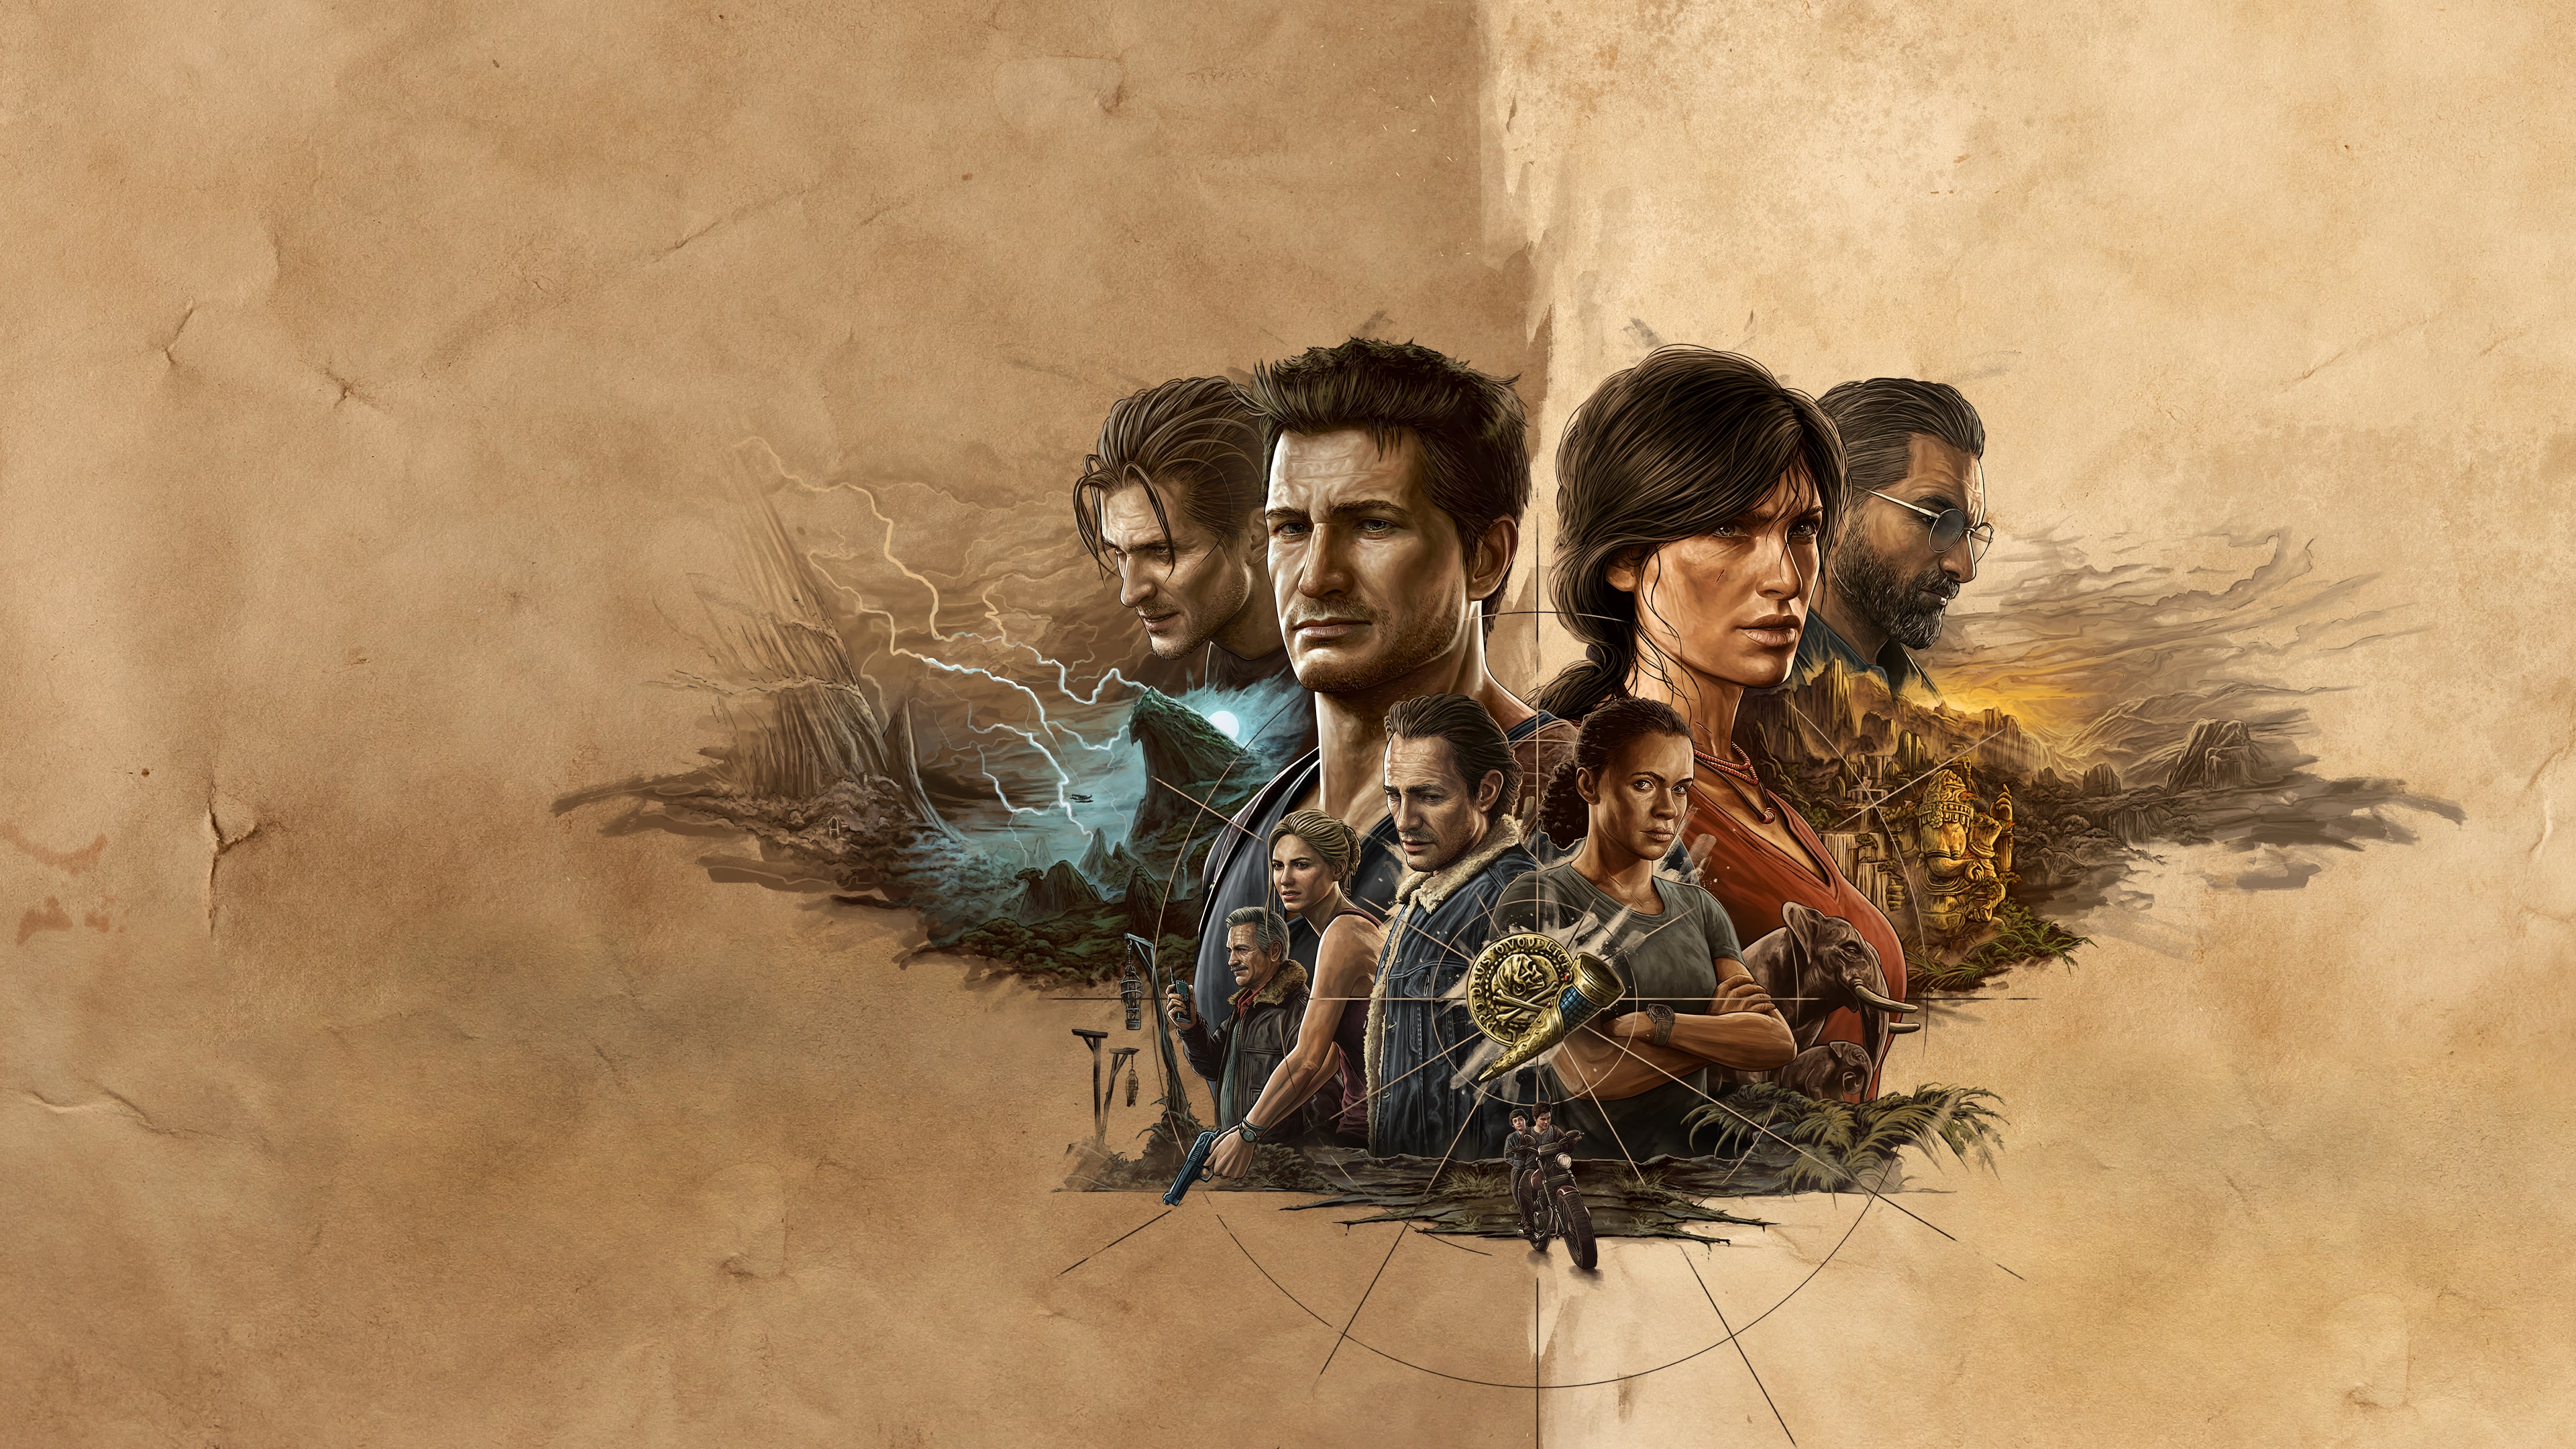 Uncharted fans really want the OG trilogy remastered for PS5